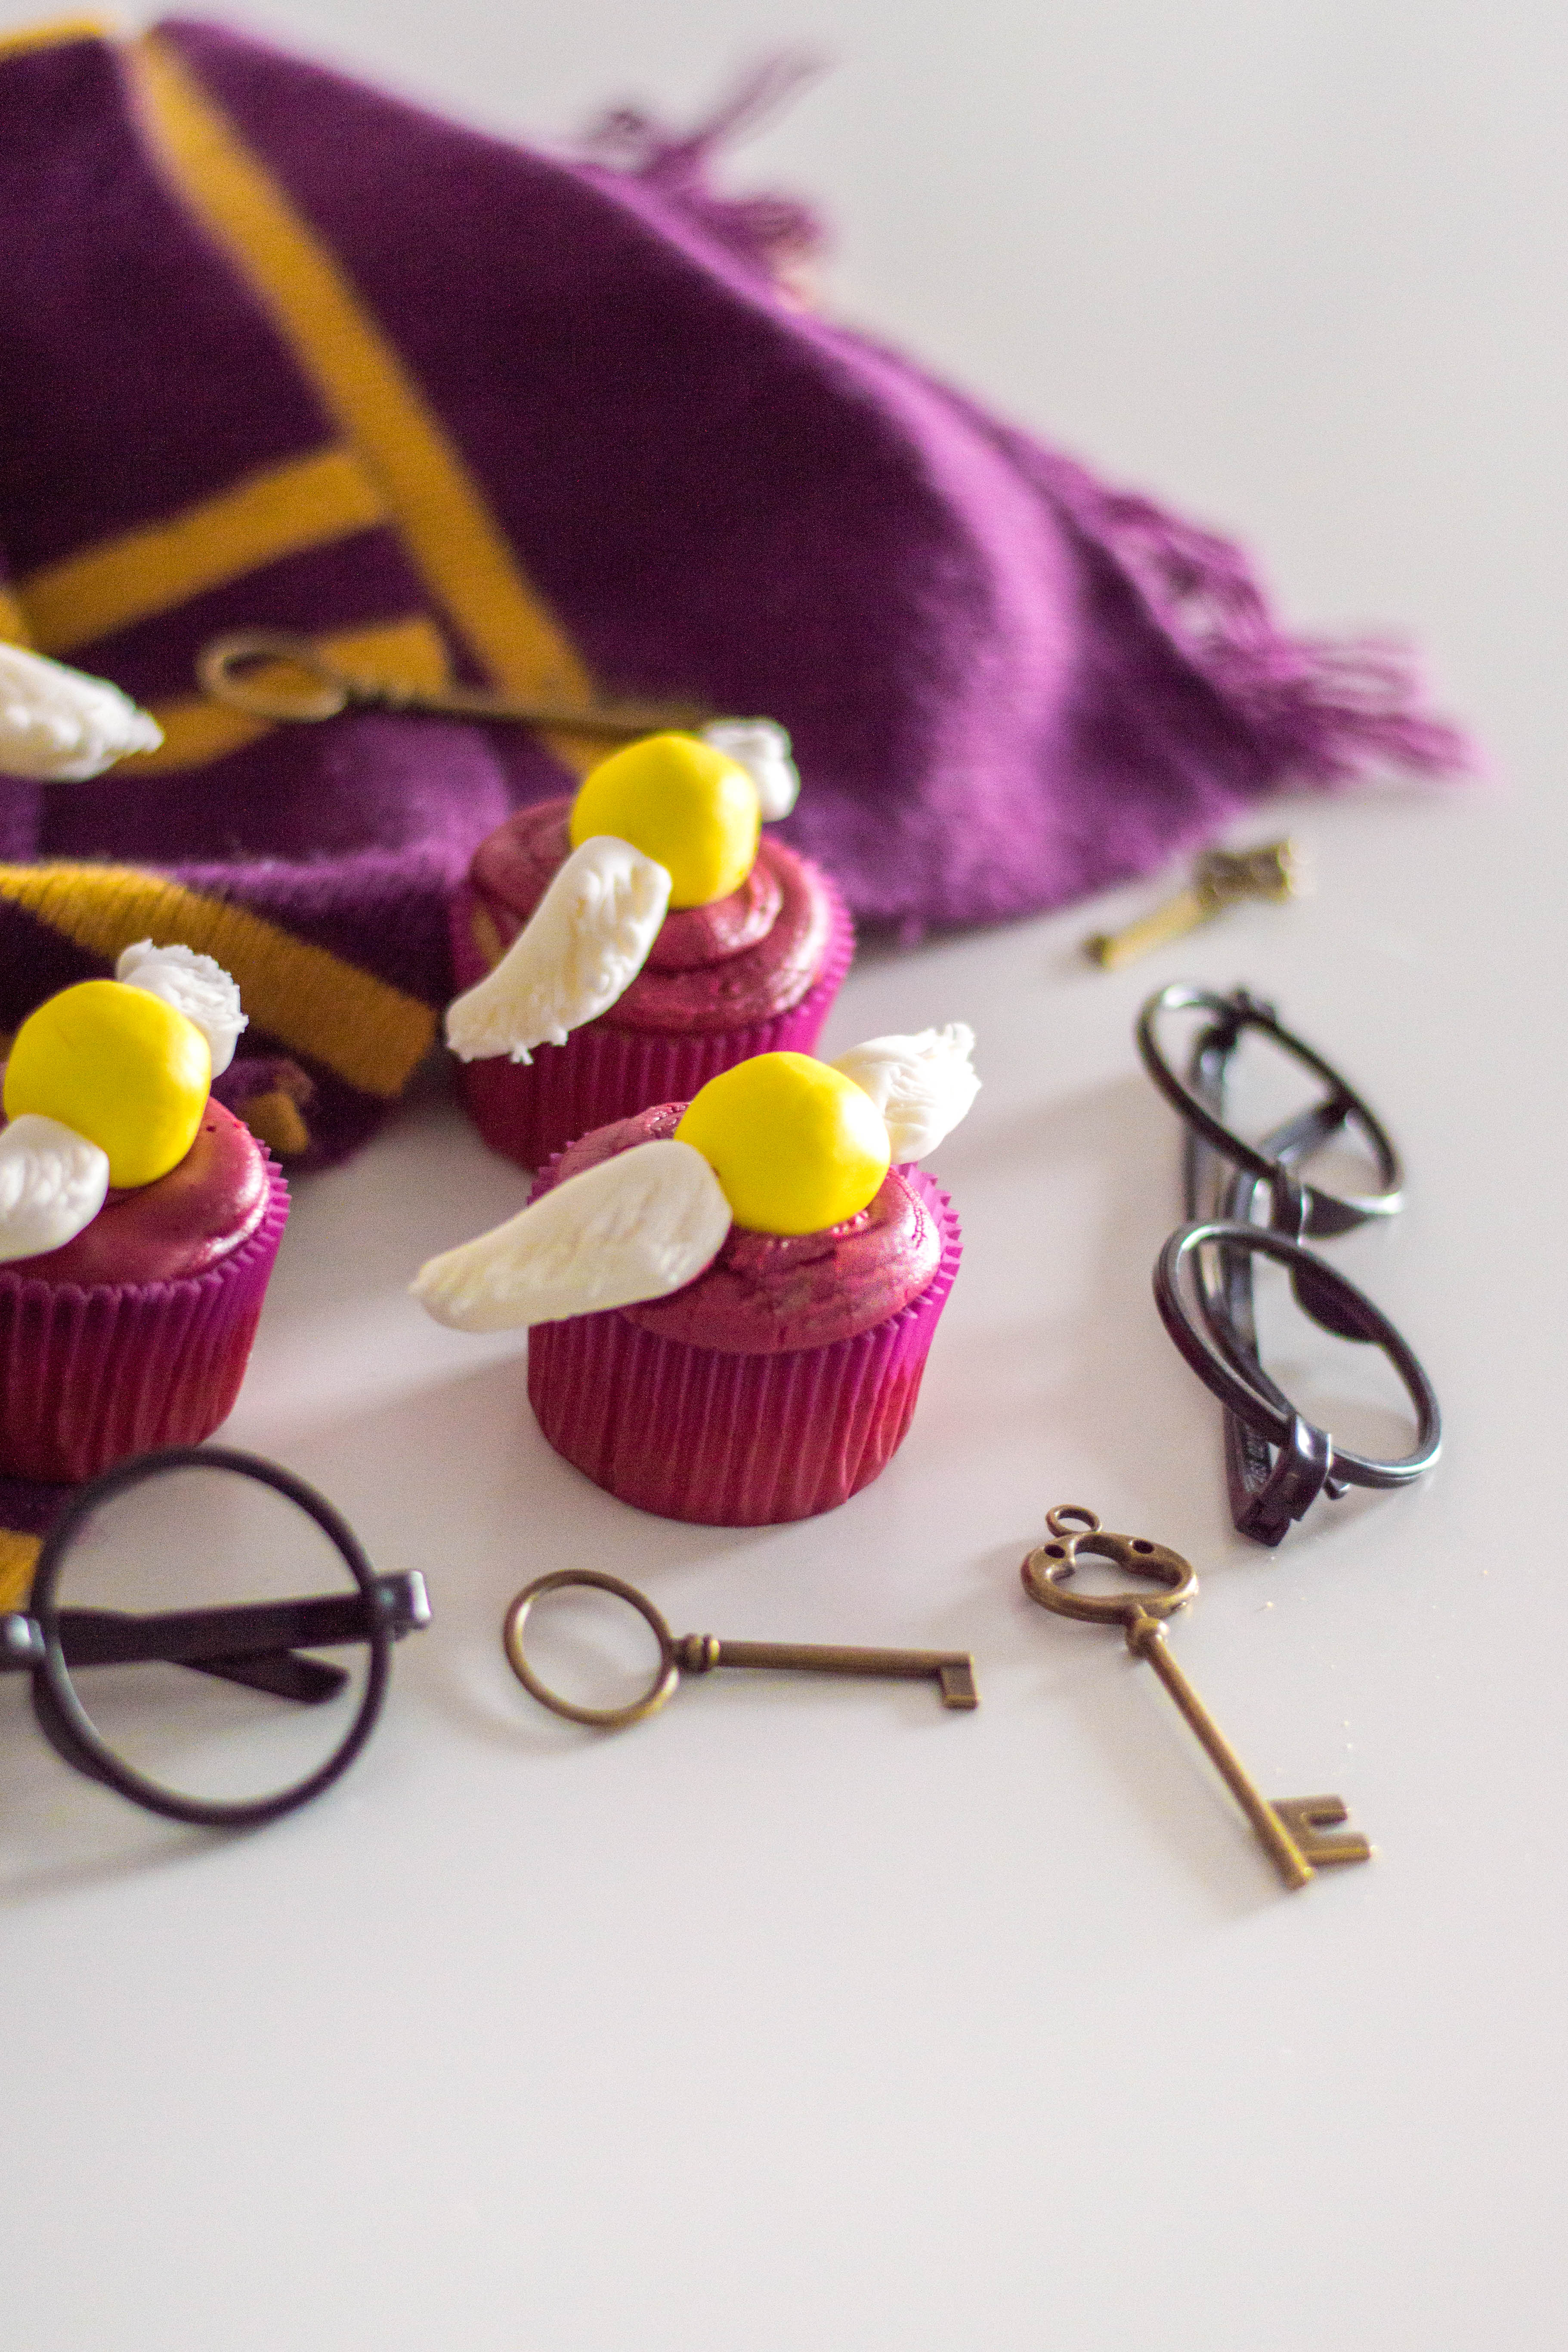 Feeling magical? These Golden Snitch Cupcakes are inspired by our favorite wizard and we can't wait to feast on them!